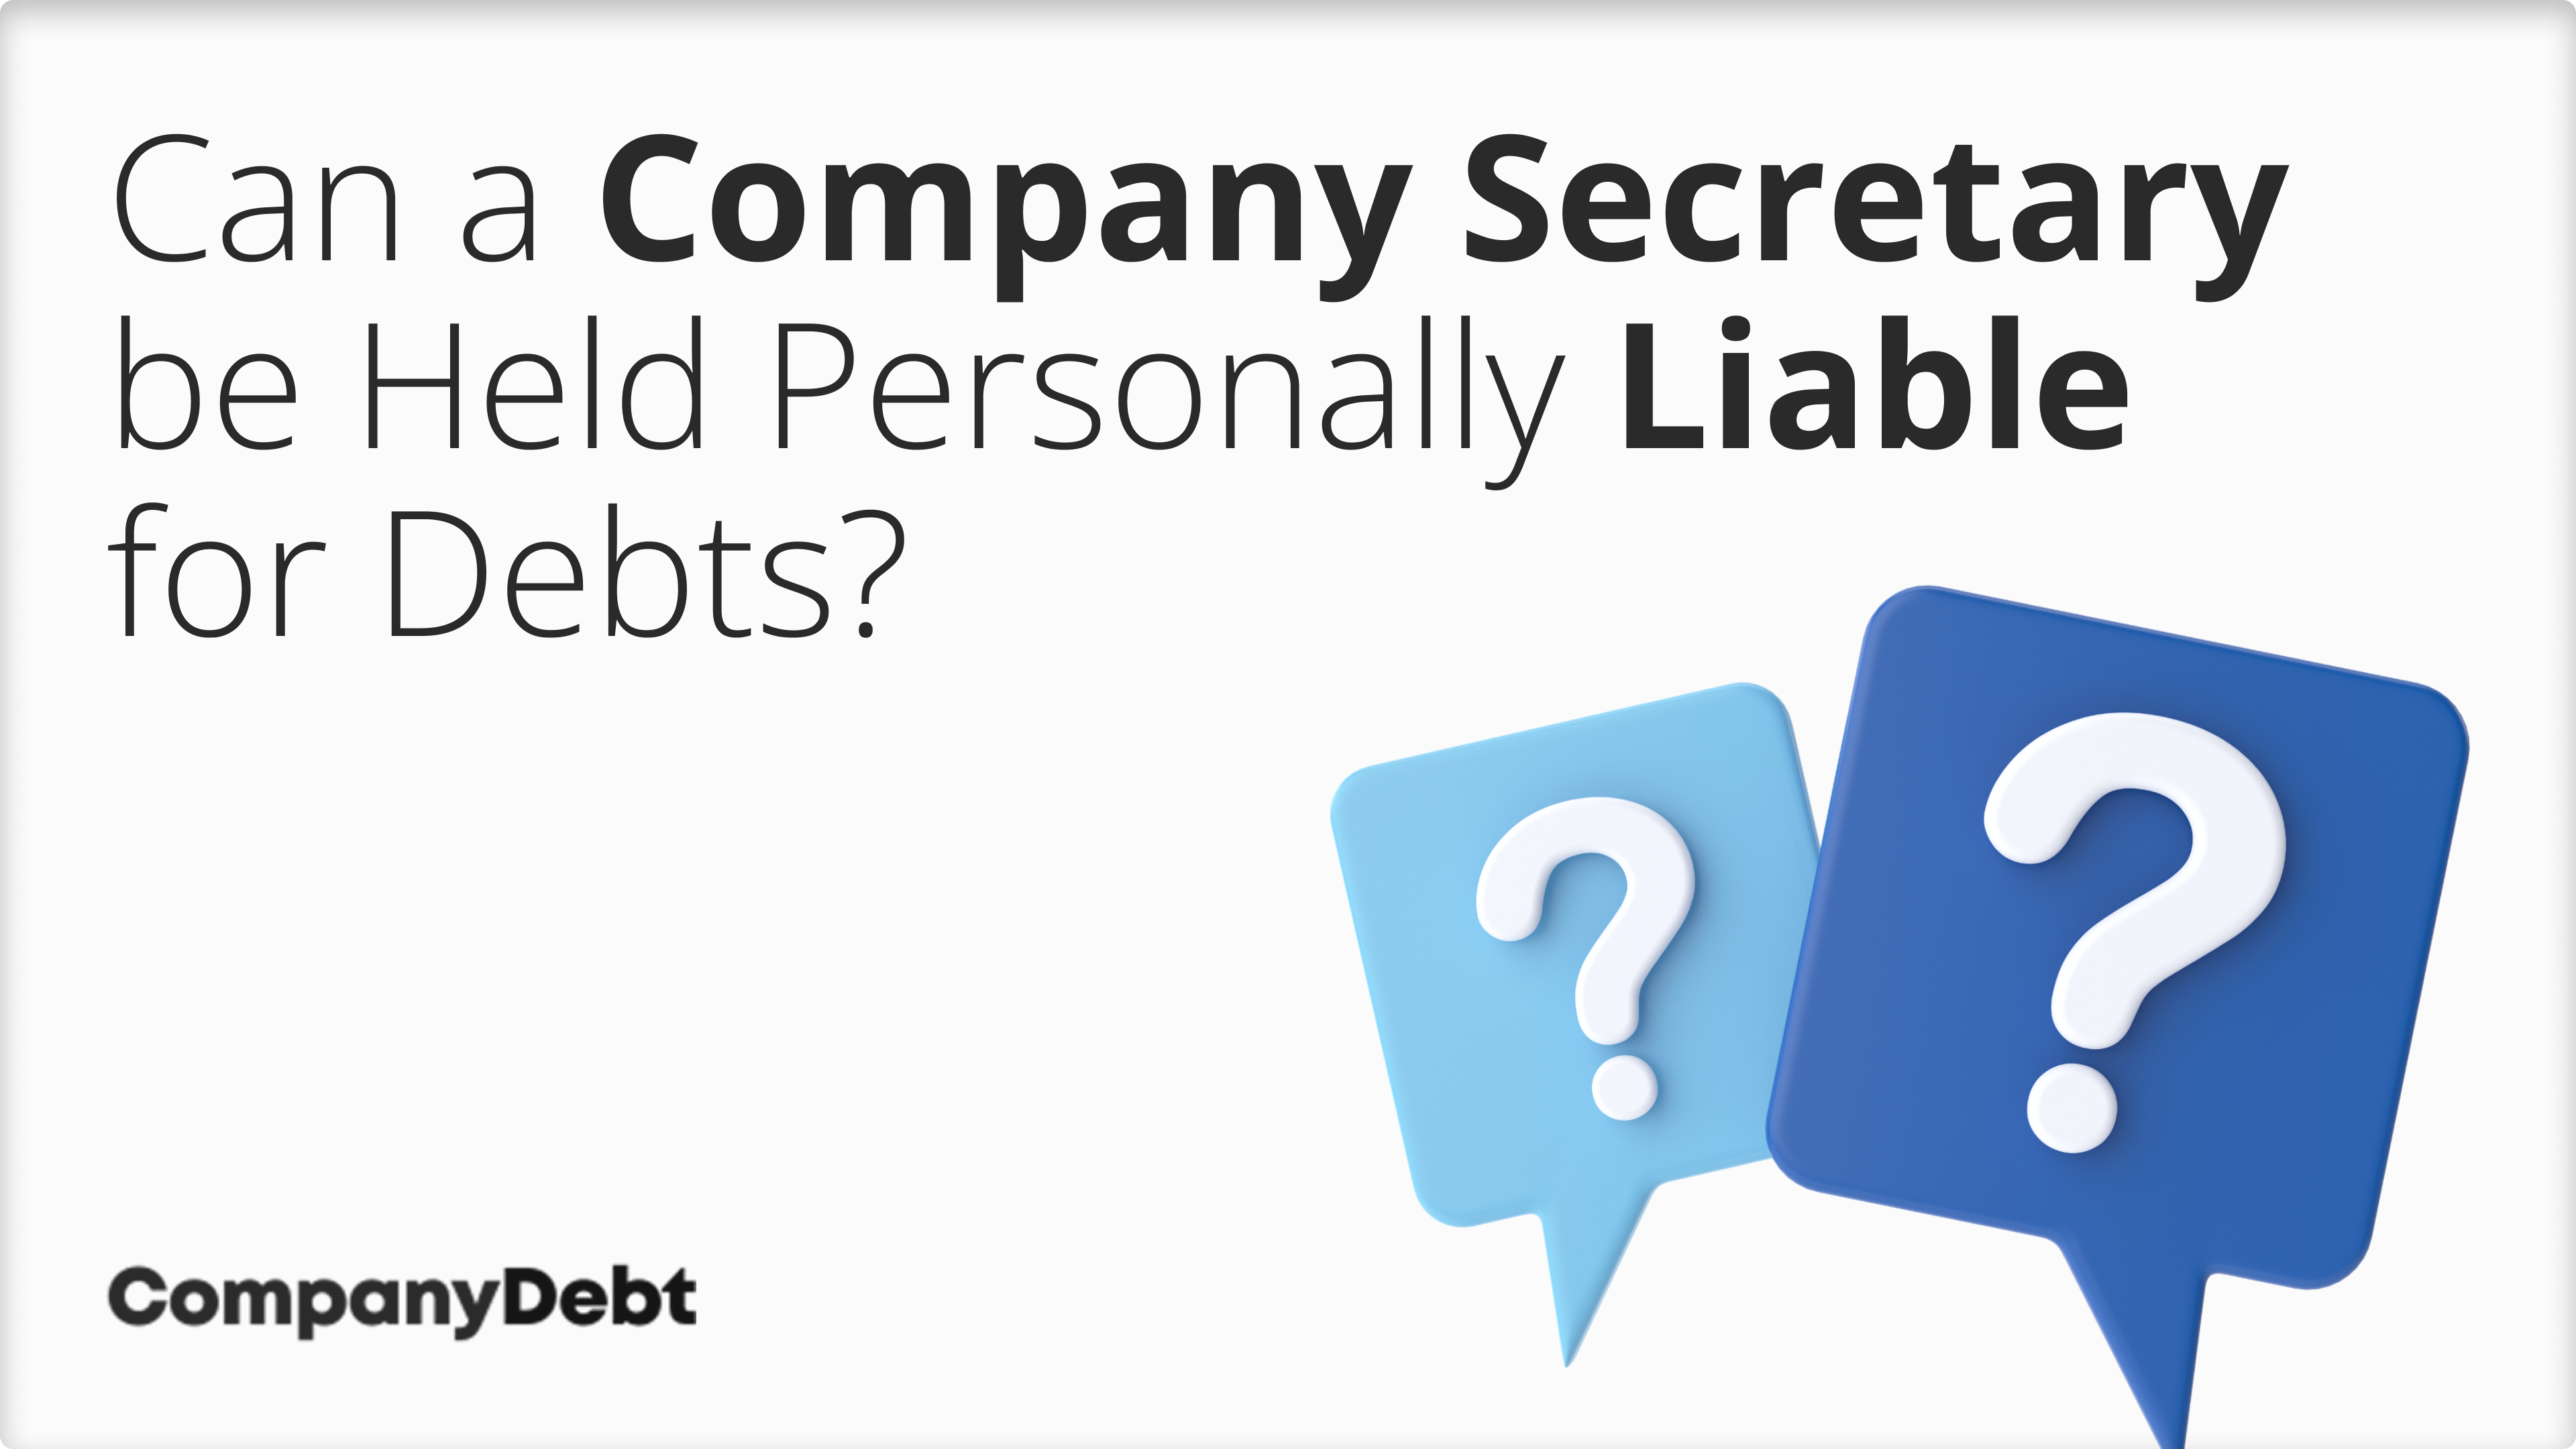 Can a Company Secretary be Held Personally Liable for Debts?